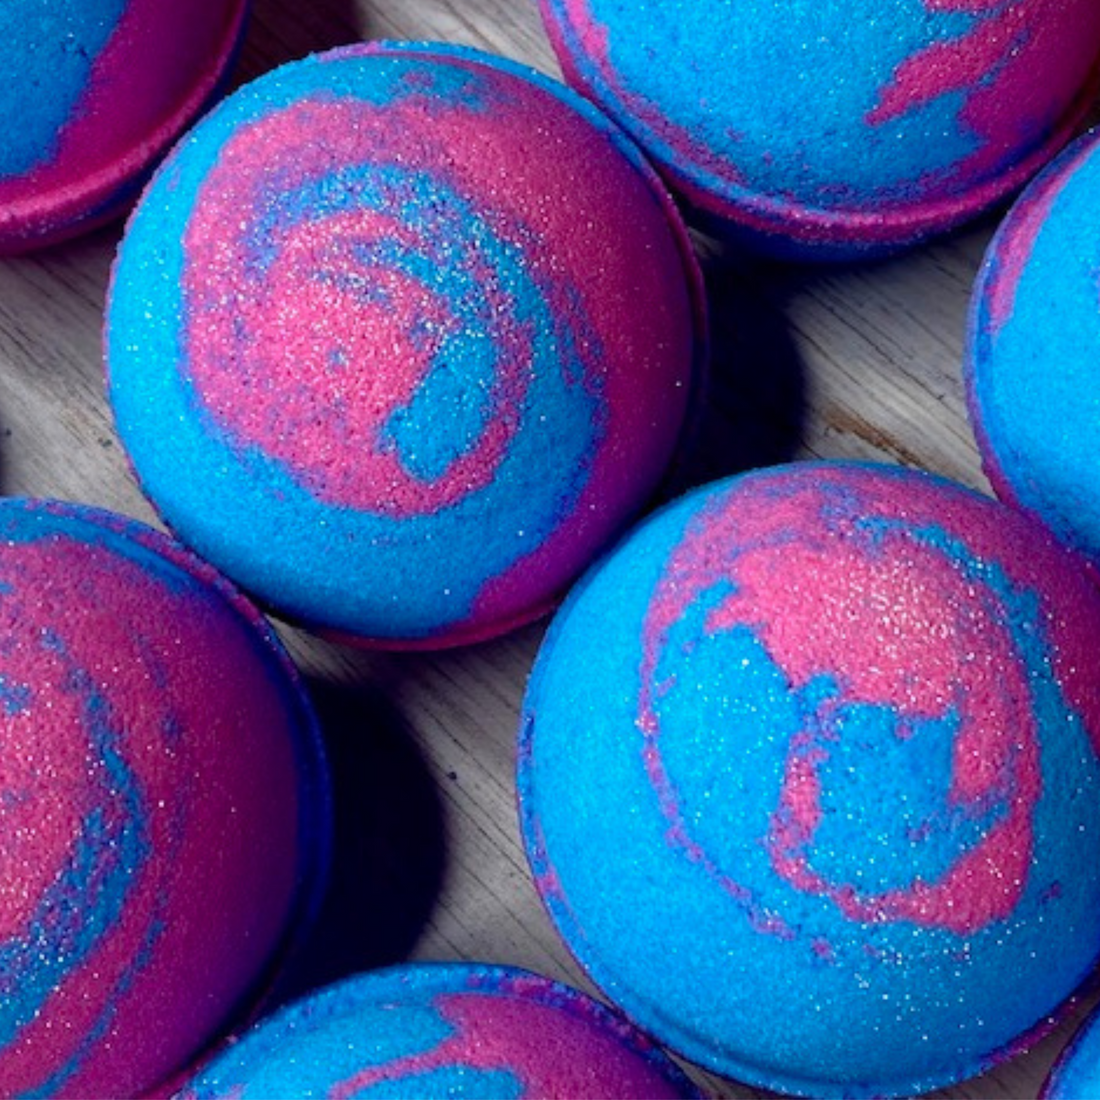 Buy Bath Bombs in Bulk and Save!